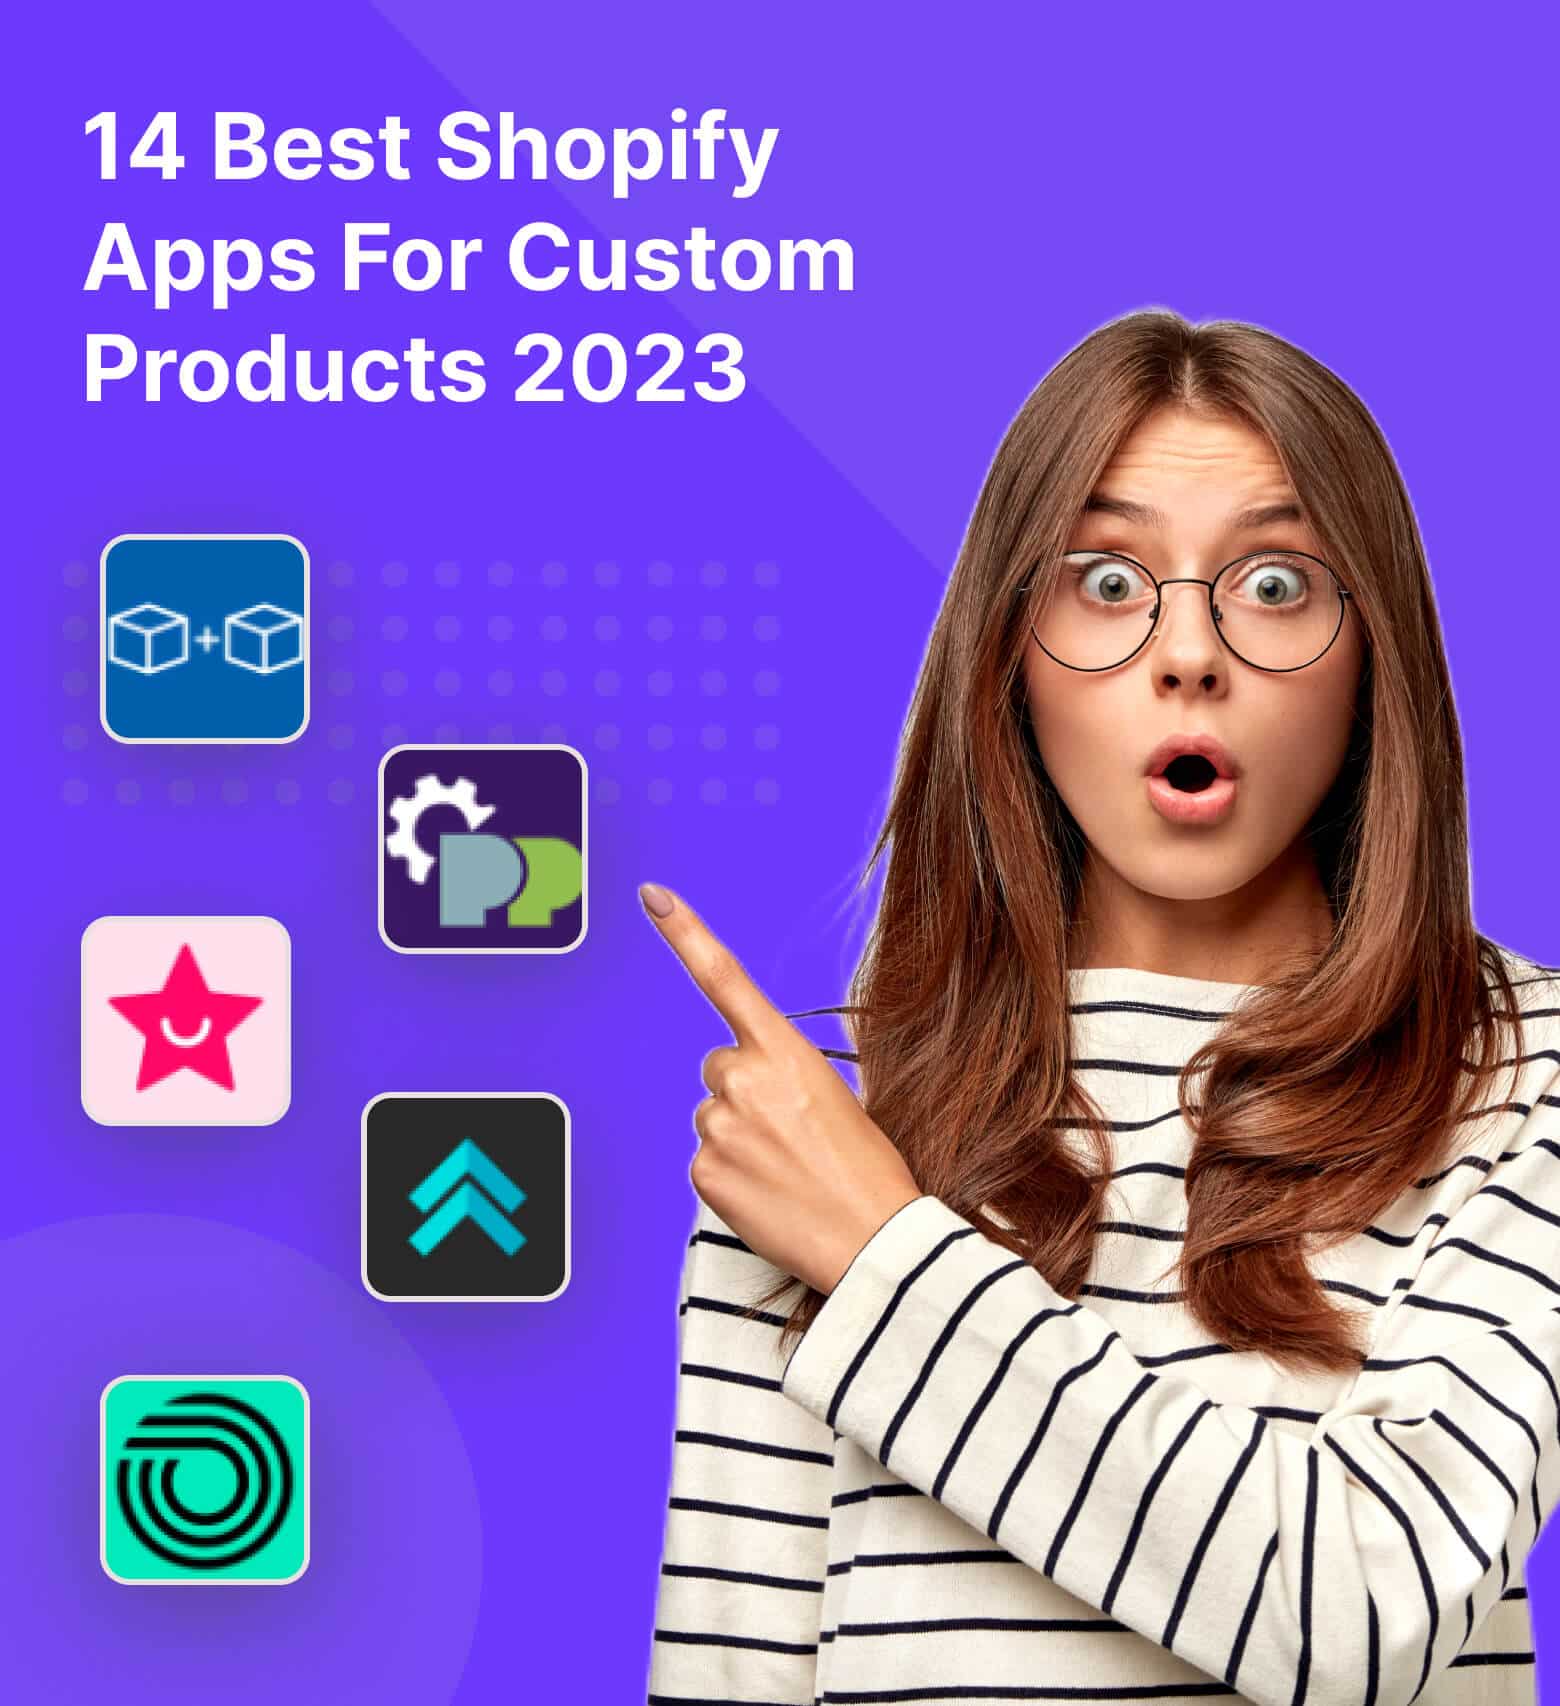 Best Shopify Apps For Custom Products